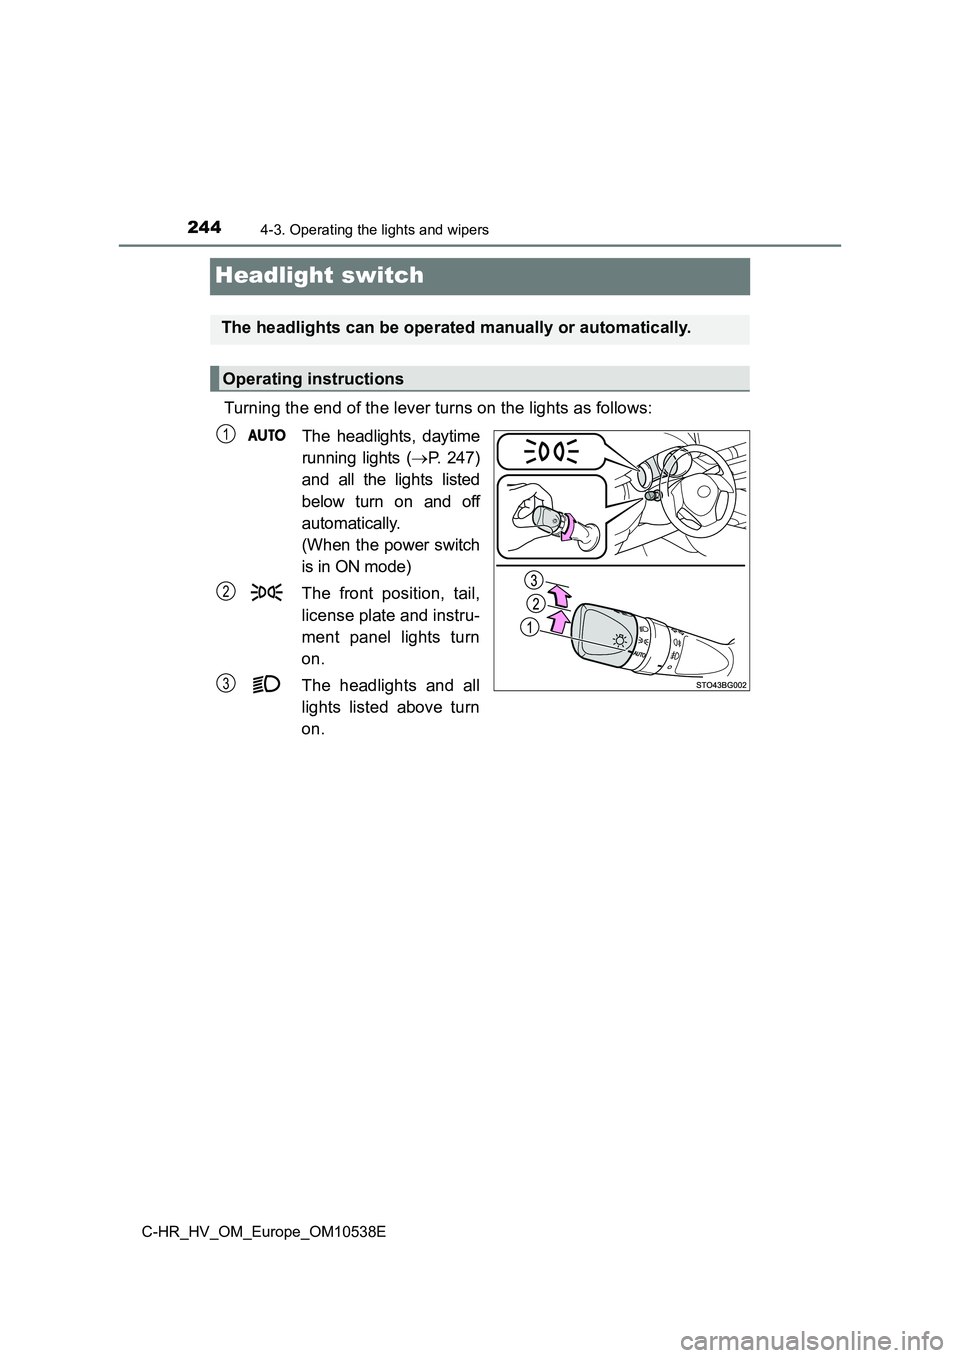 TOYOTA C_HR HYBRID 2016 Owners Manual 2444-3. Operating the lights and wipers
C-HR_HV_OM_Europe_OM10538E
Headlight switch
Turning the end of the lever turns on the lights as follows: 
The headlights, daytime 
running lights ( P. 247) 
